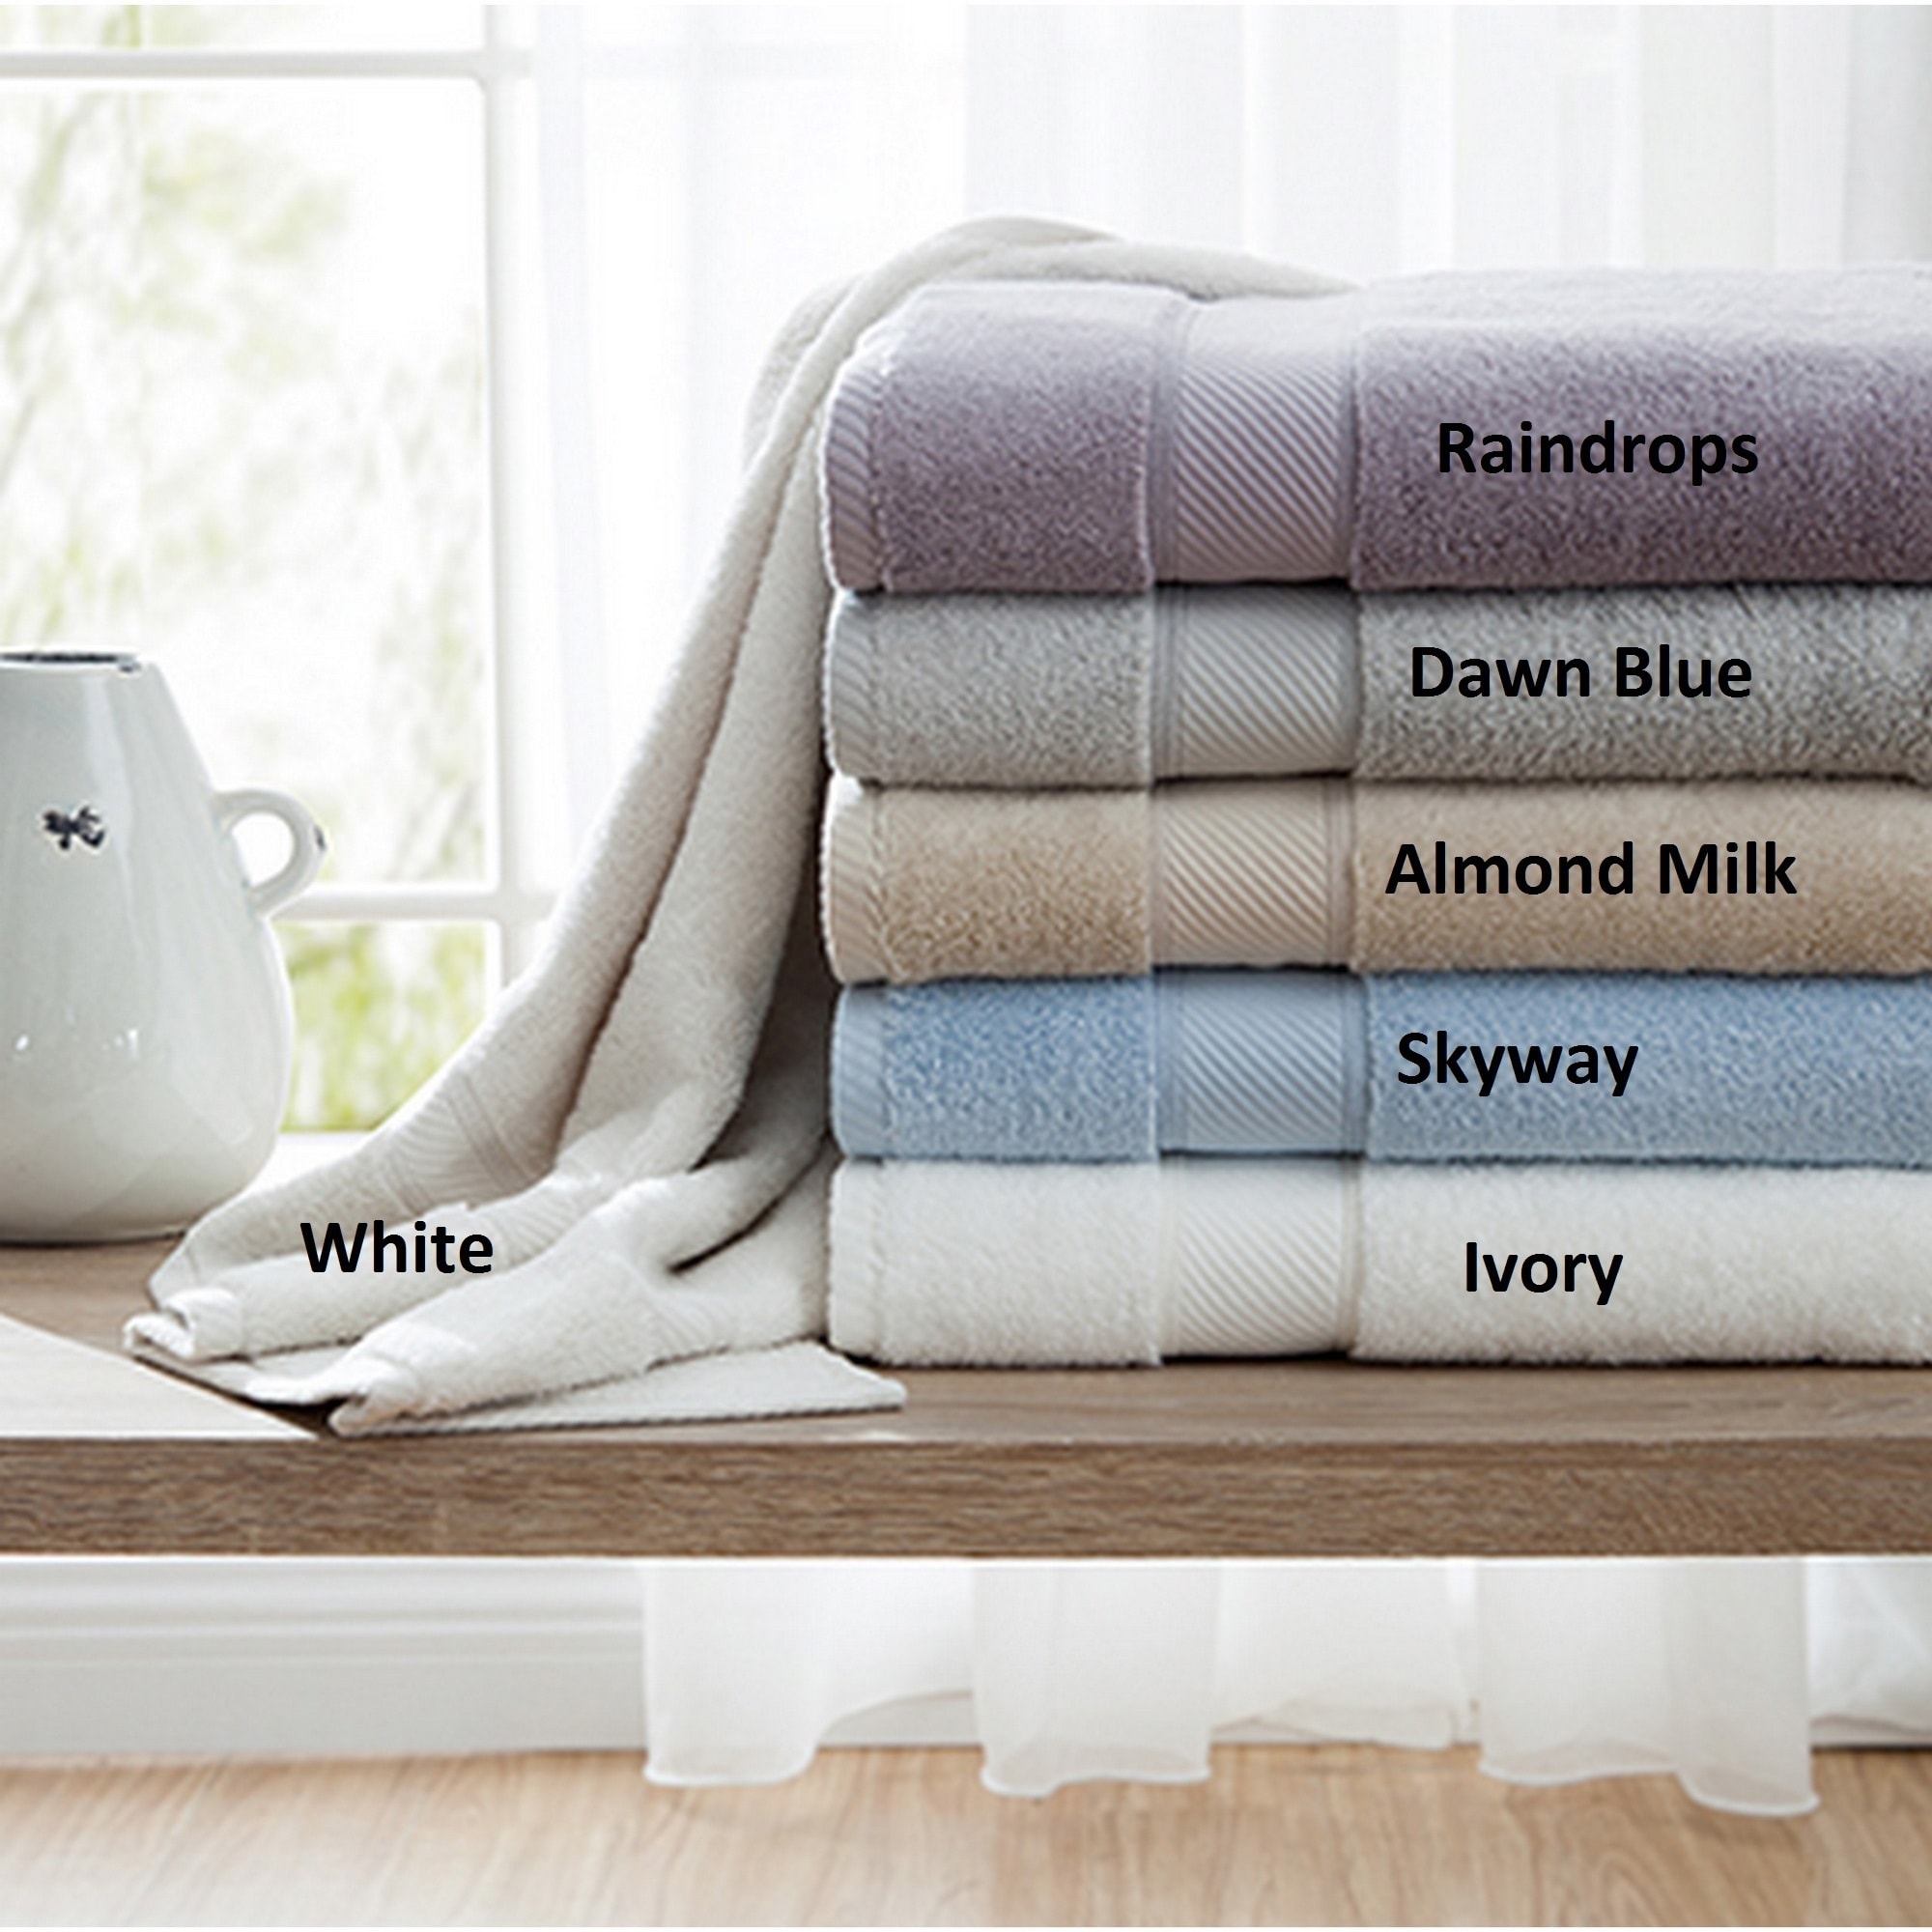 Towel Collections